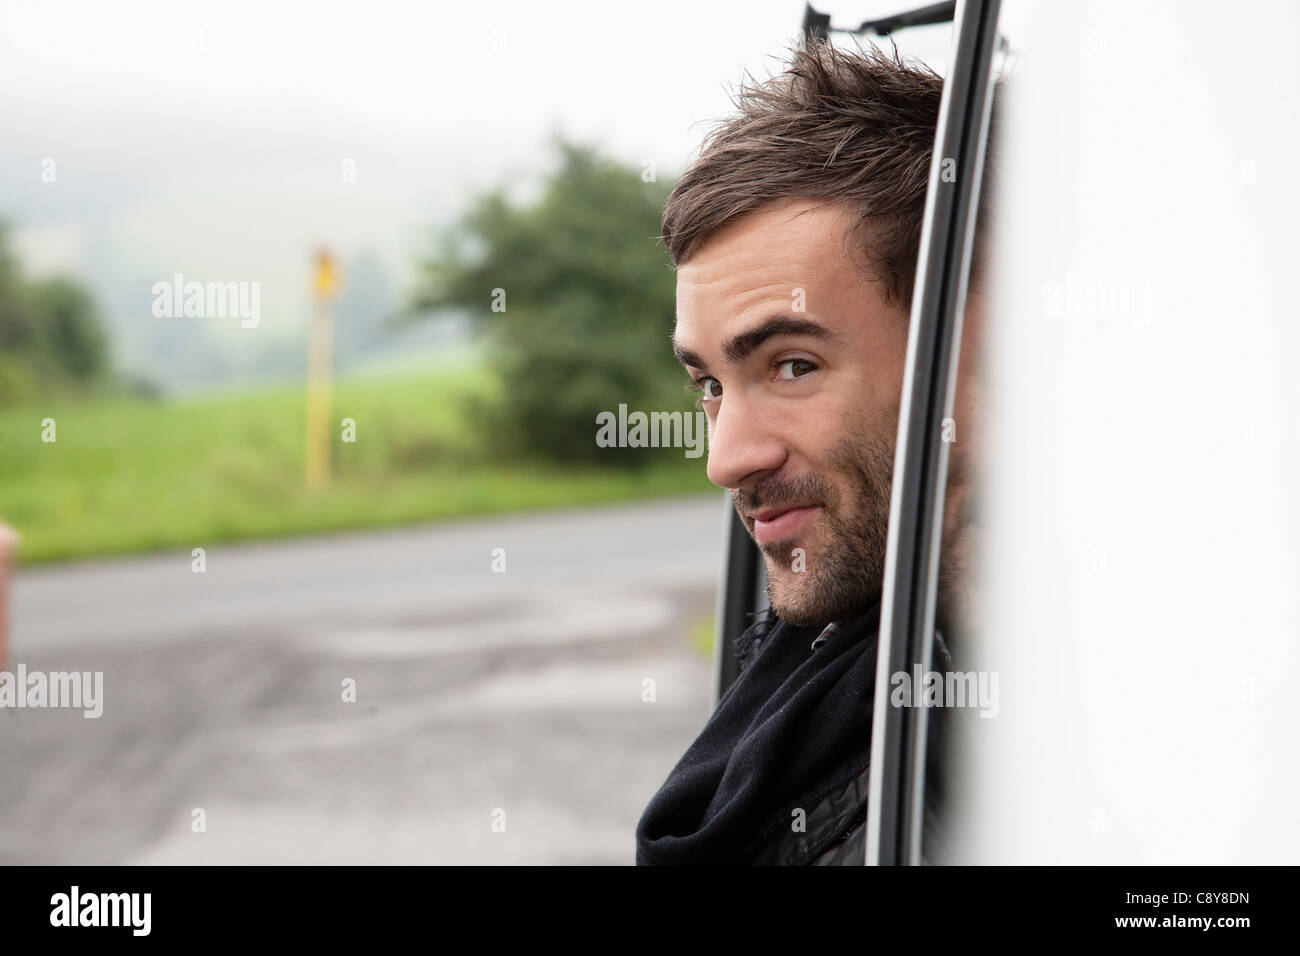 portrait of young man looking out of car window Stock Photo